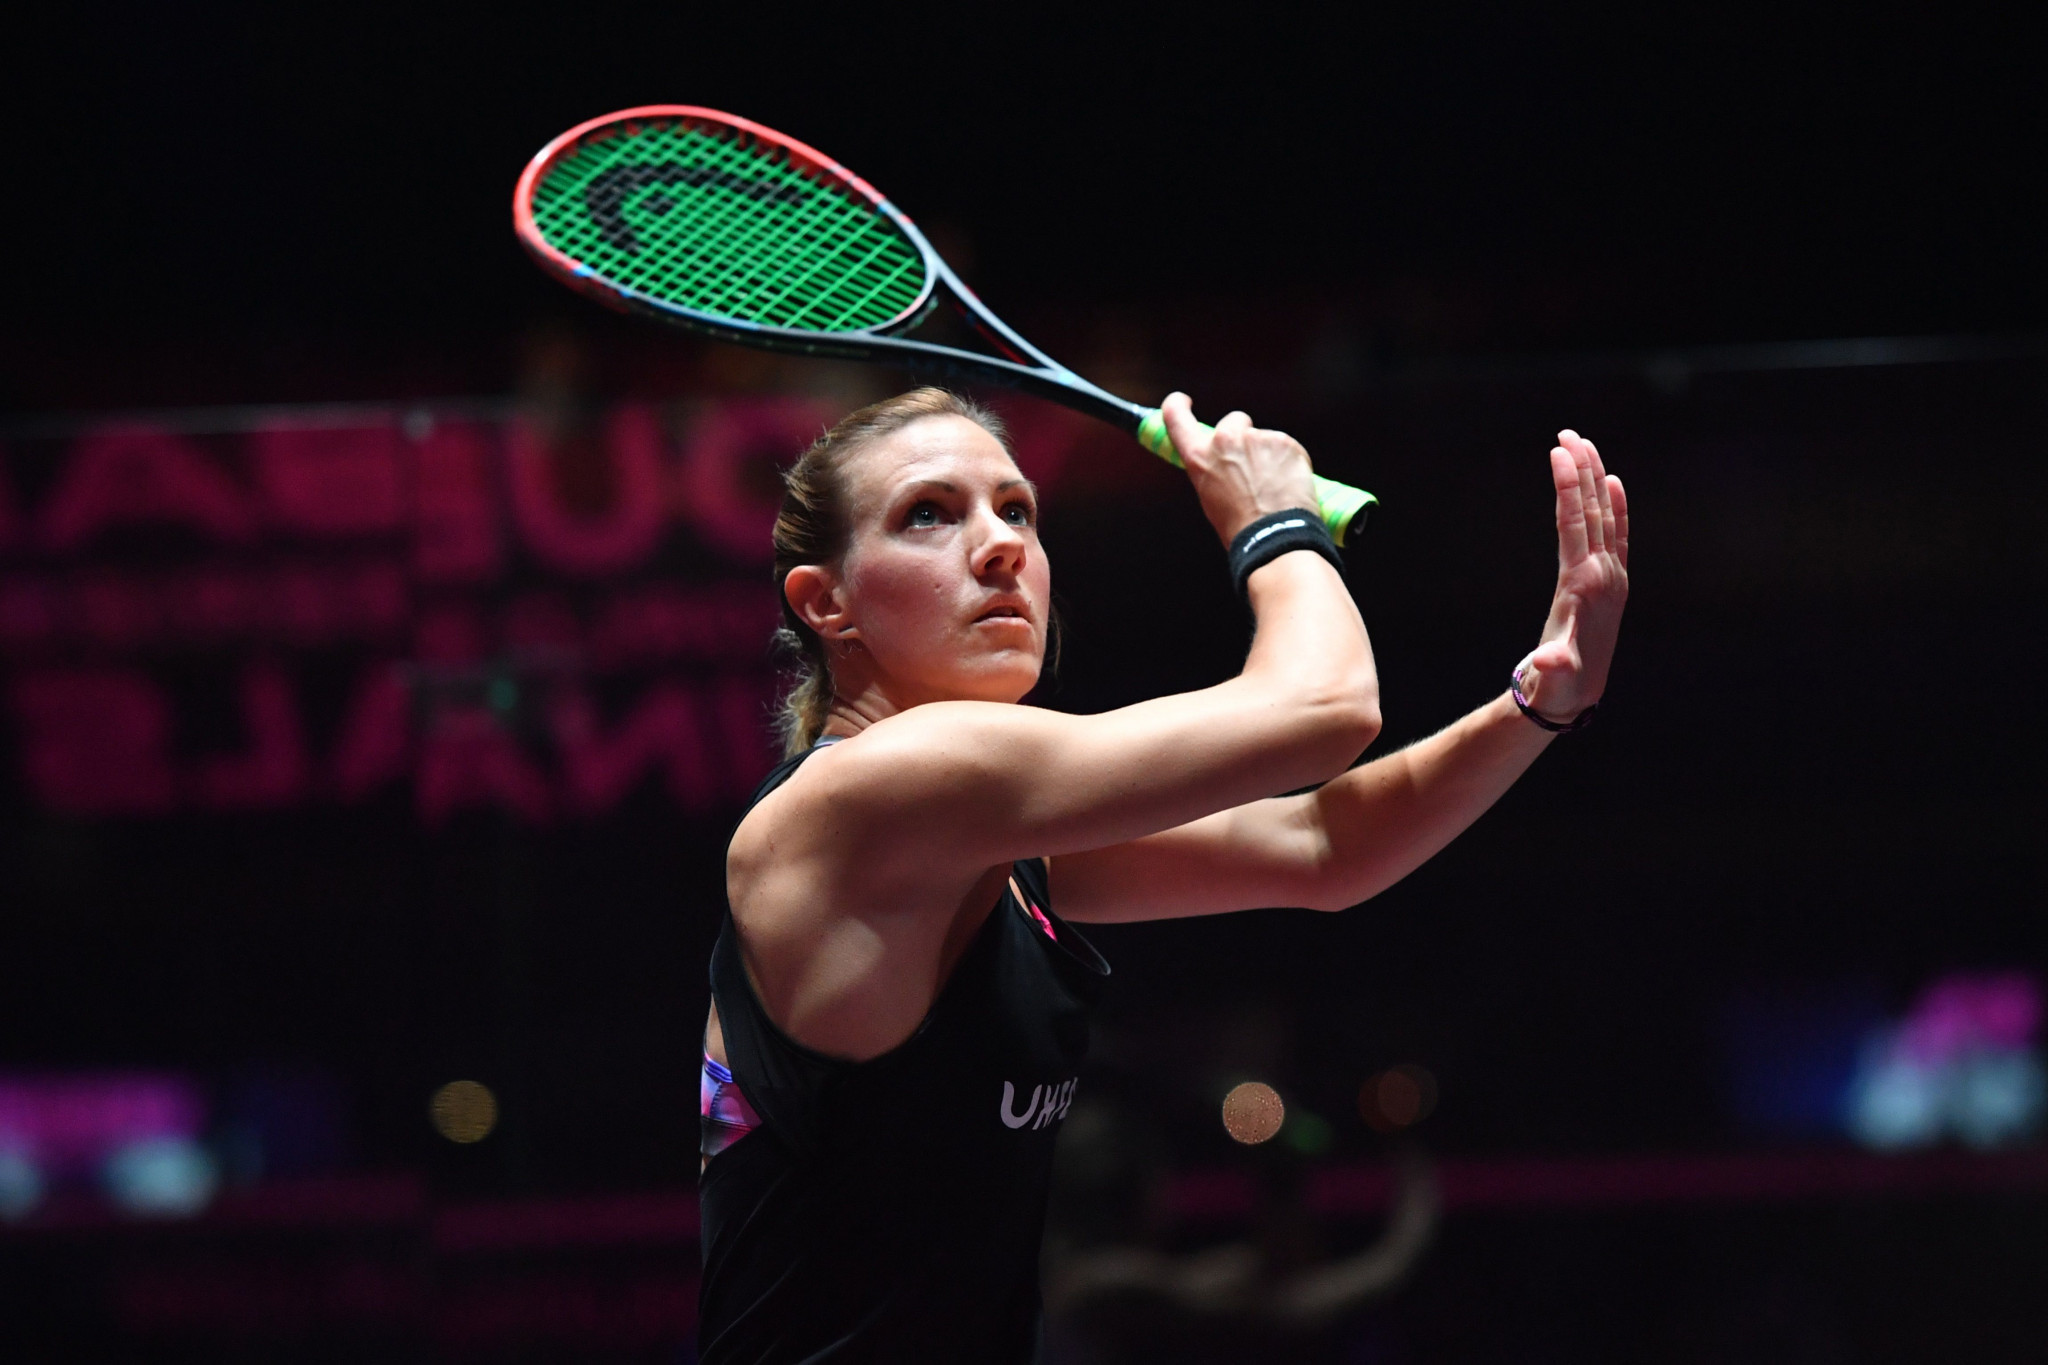 Laura Massano was a shock exit in Manchester having been beaten by Wales' Tesni Evans ©Getty Images